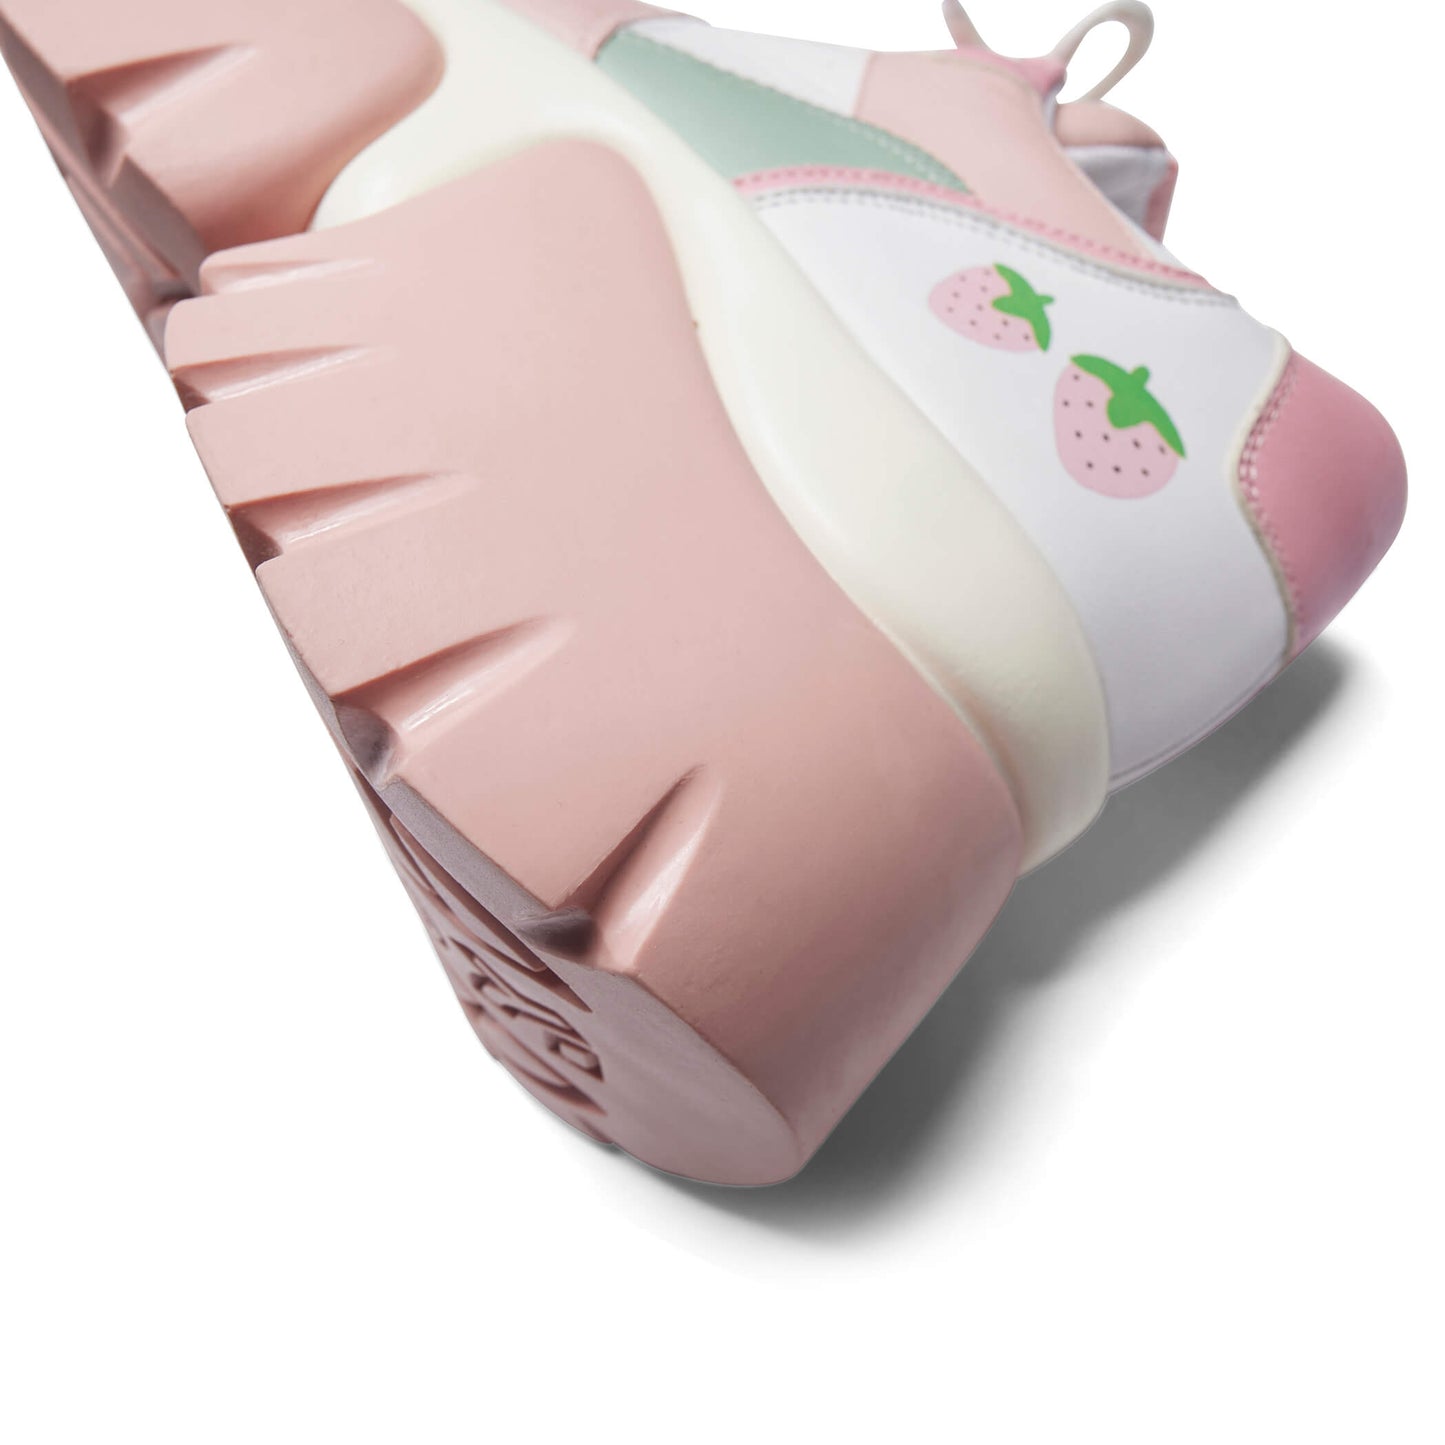 Strawberry Juice Trainers - Trainers - KOI Footwear - Pink - Sole Back View